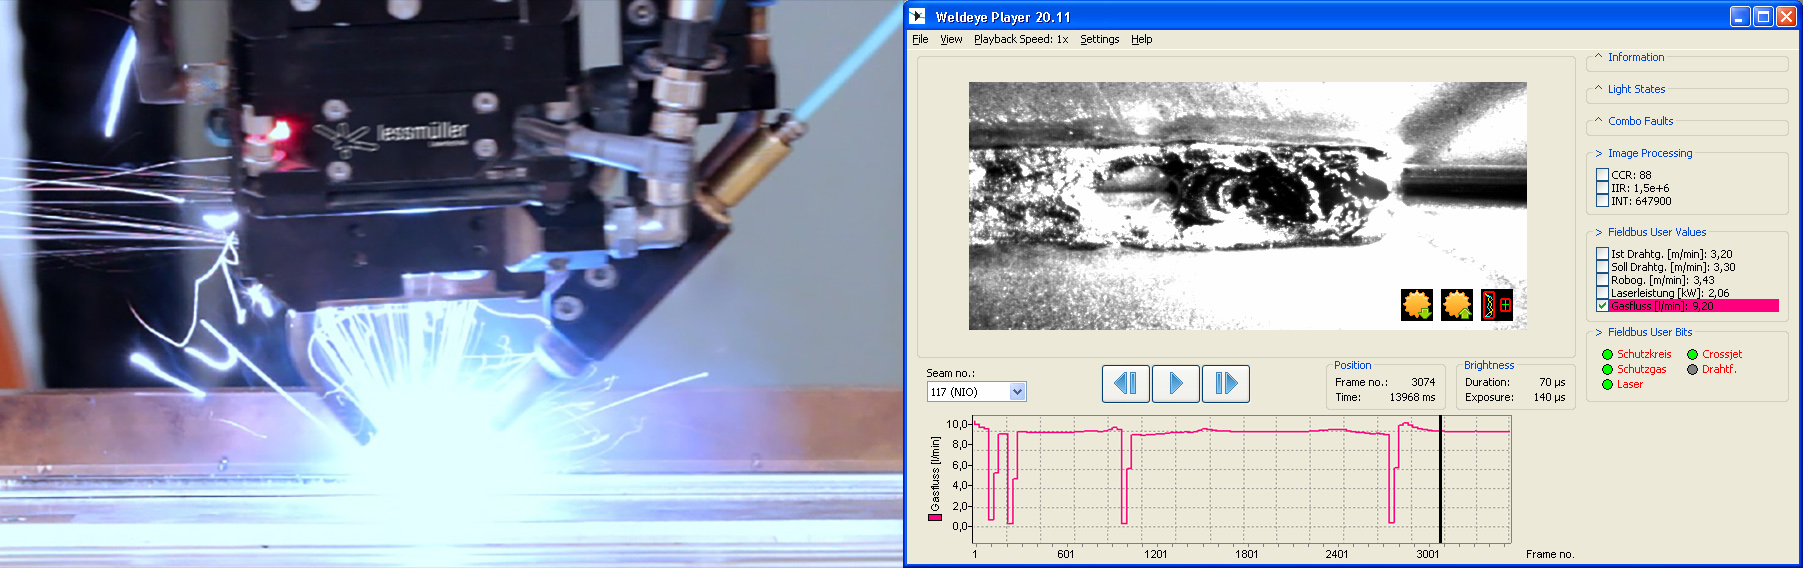 Laser weld monitoring system - Statusimages of work